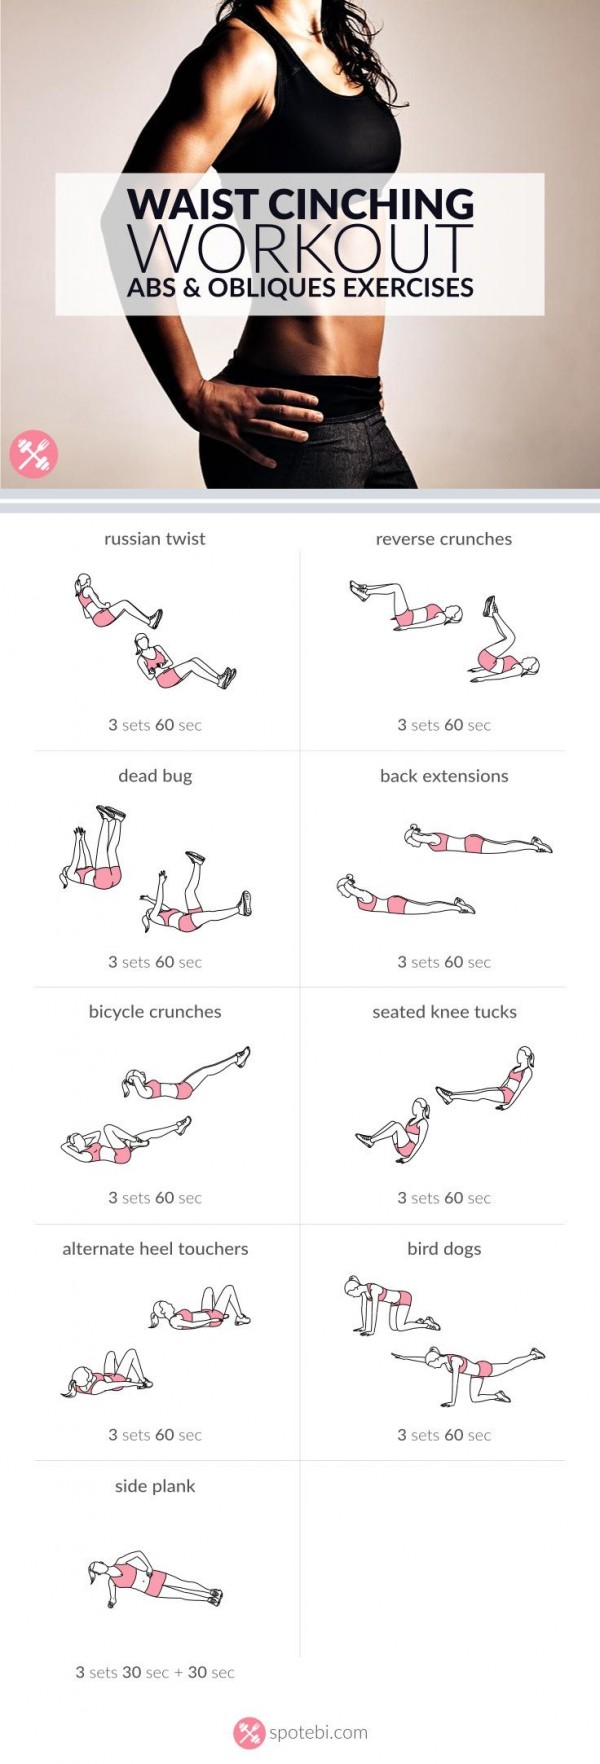 core-exercises-for-women-461900505512195639